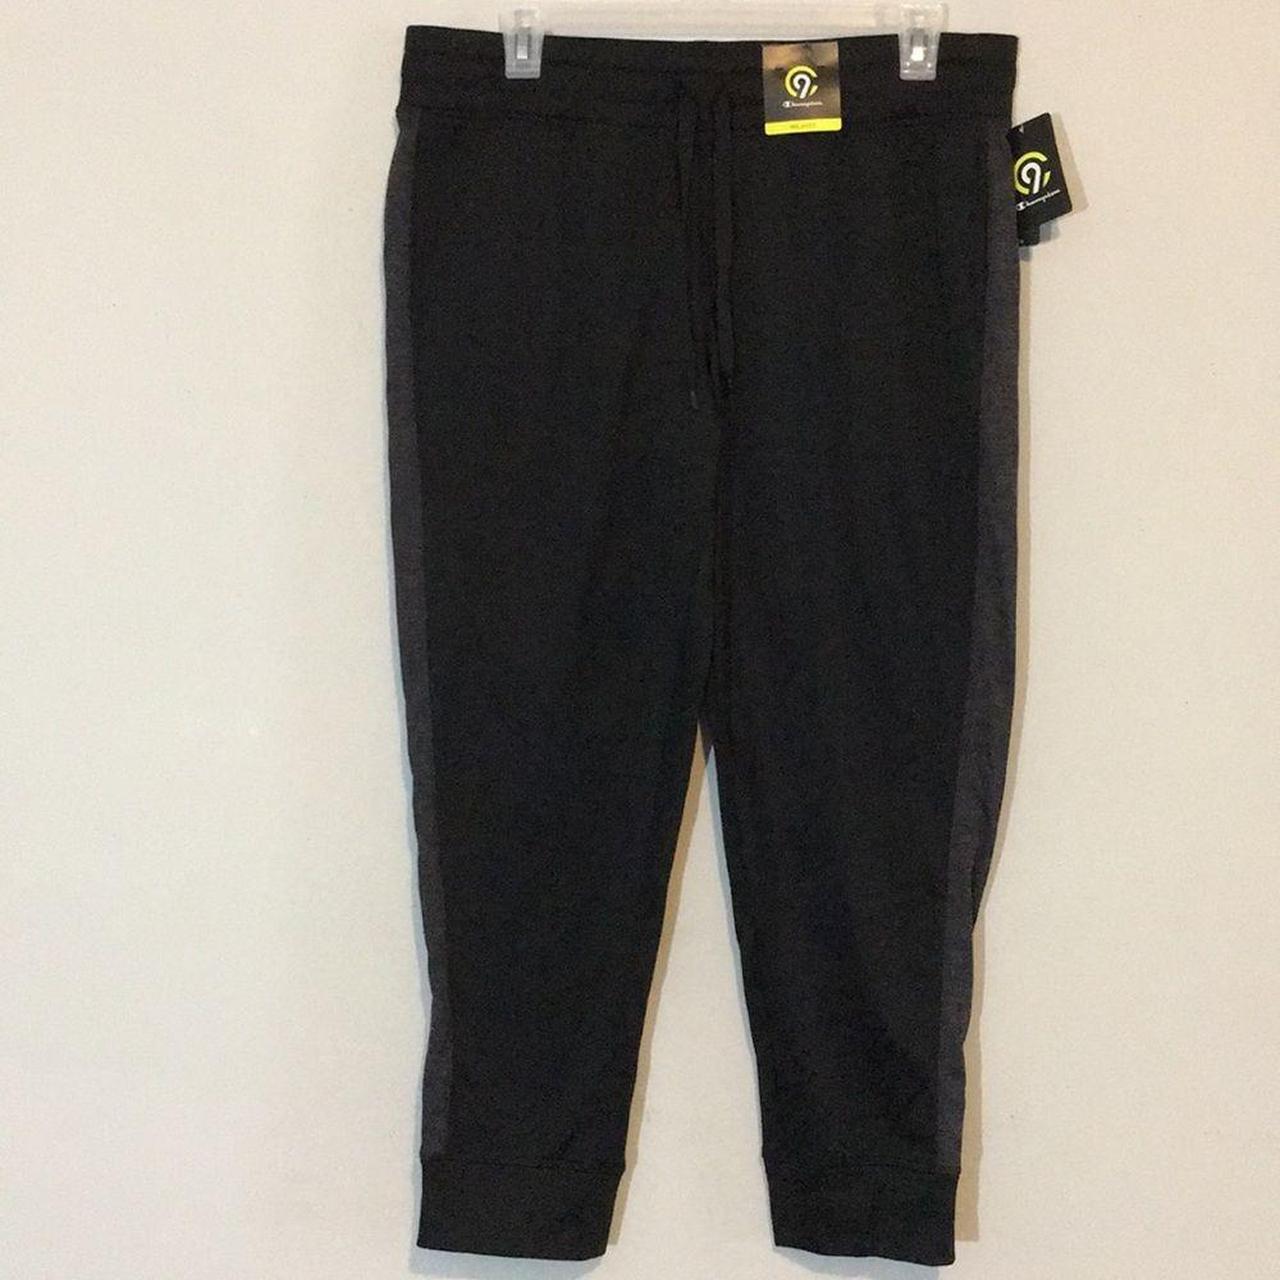 Champion Women's Black and Grey Trousers